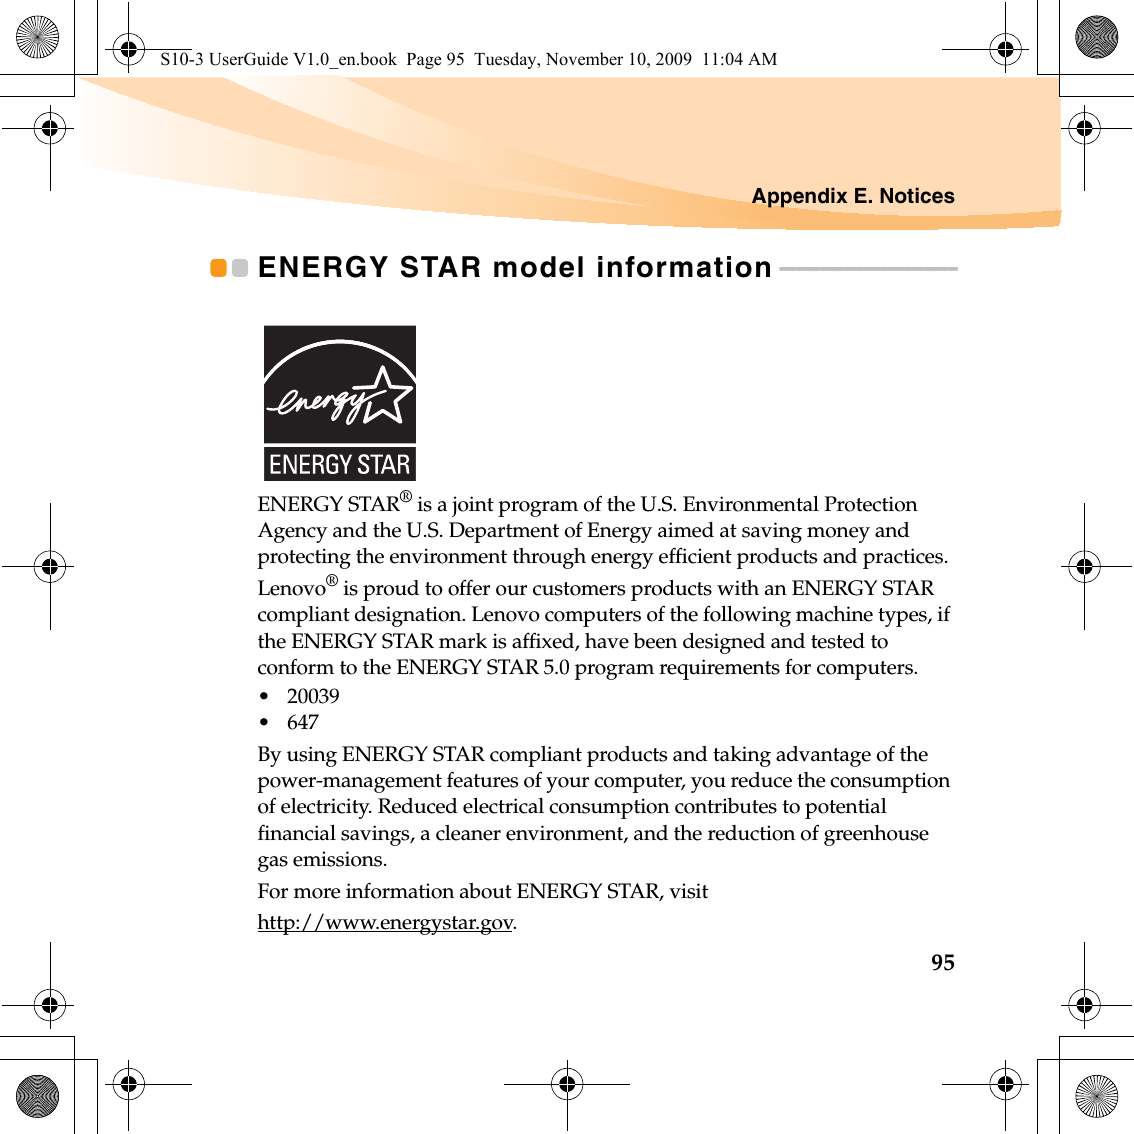 Appendix E. Notices95ENERGY STAR model information - - - - - - - - - - - - - - - - - - - - - - - - - - - - -ENERGY STAR® is a joint program of the U.S. Environmental Protection Agency and the U.S. Department of Energy aimed at saving money and protecting the environment through energy efficient products and practices.Lenovo® is proud to offer our customers products with an ENERGY STAR compliant designation. Lenovo computers of the following machine types, if the ENERGY STAR mark is affixed, have been designed and tested to conform to the ENERGY STAR 5.0 program requirements for computers.• 20039•647By using ENERGY STAR compliant products and taking advantage of the power-management features of your computer, you reduce the consumption of electricity. Reduced electrical consumption contributes to potential financial savings, a cleaner environment, and the reduction of greenhouse gas emissions.For more information about ENERGY STAR, visithttp://www.energystar.gov.S10-3 UserGuide V1.0_en.book  Page 95  Tuesday, November 10, 2009  11:04 AM